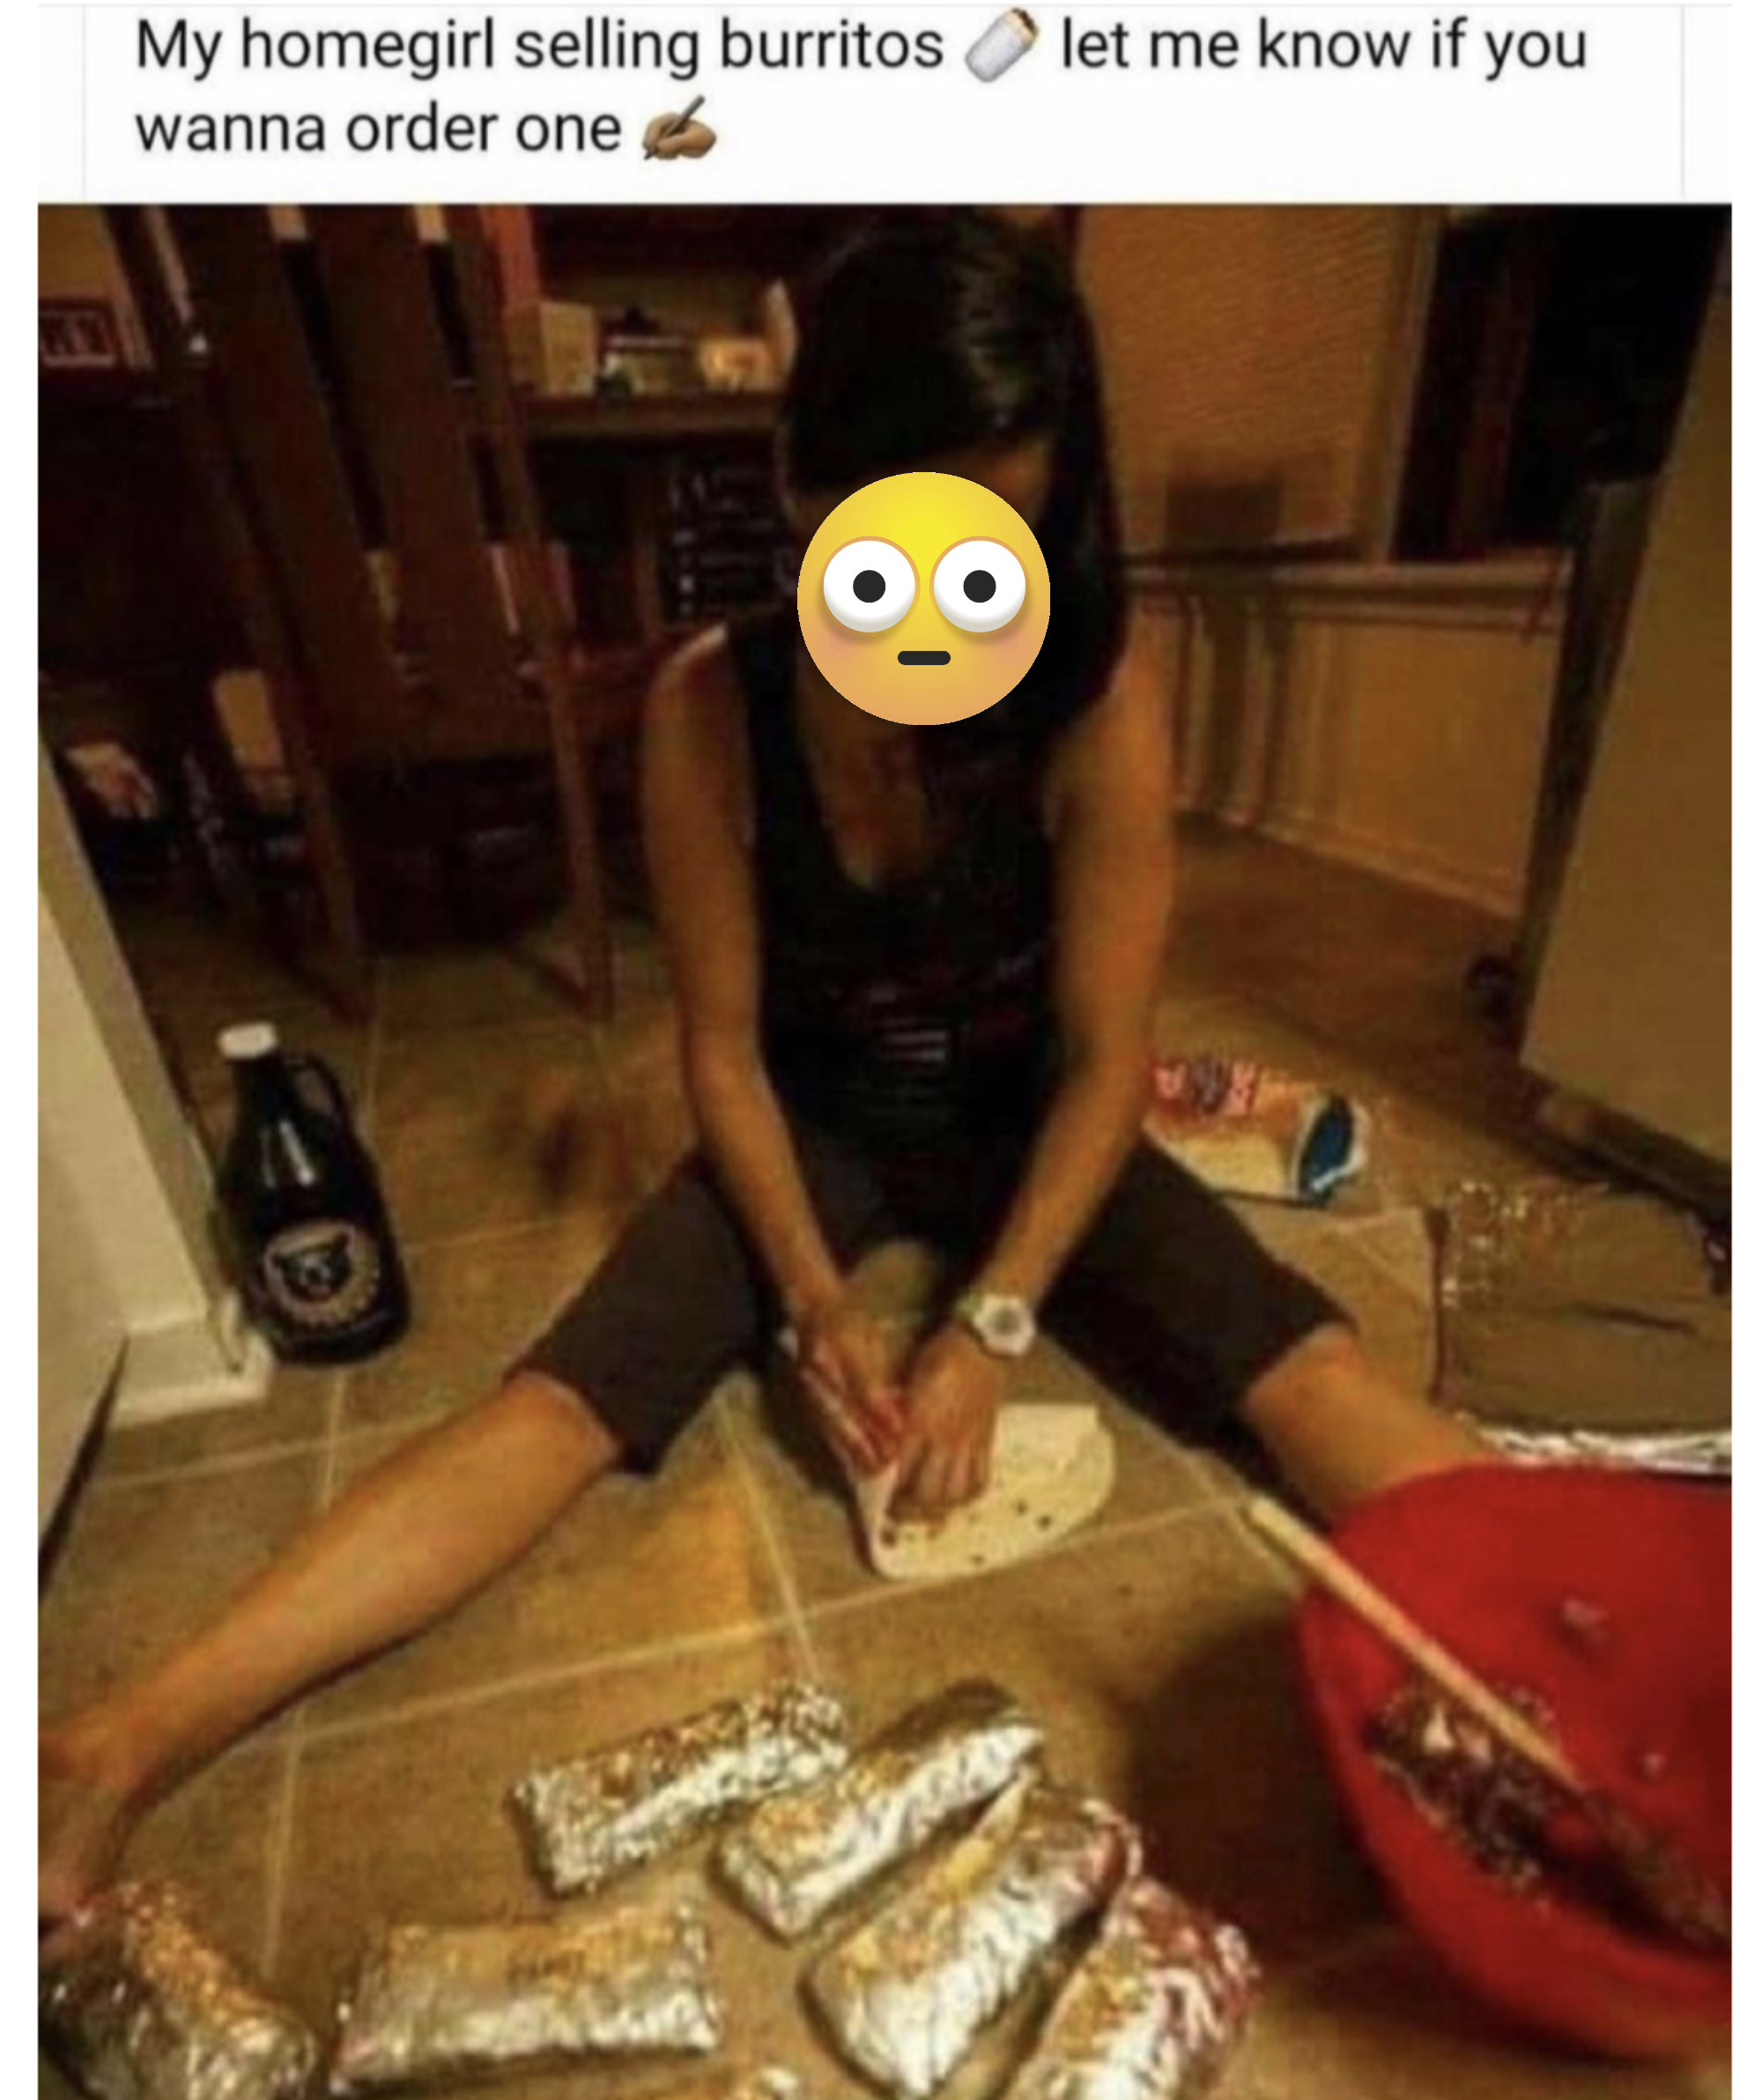 Person sitting on tiled floor wrapping a tortilla